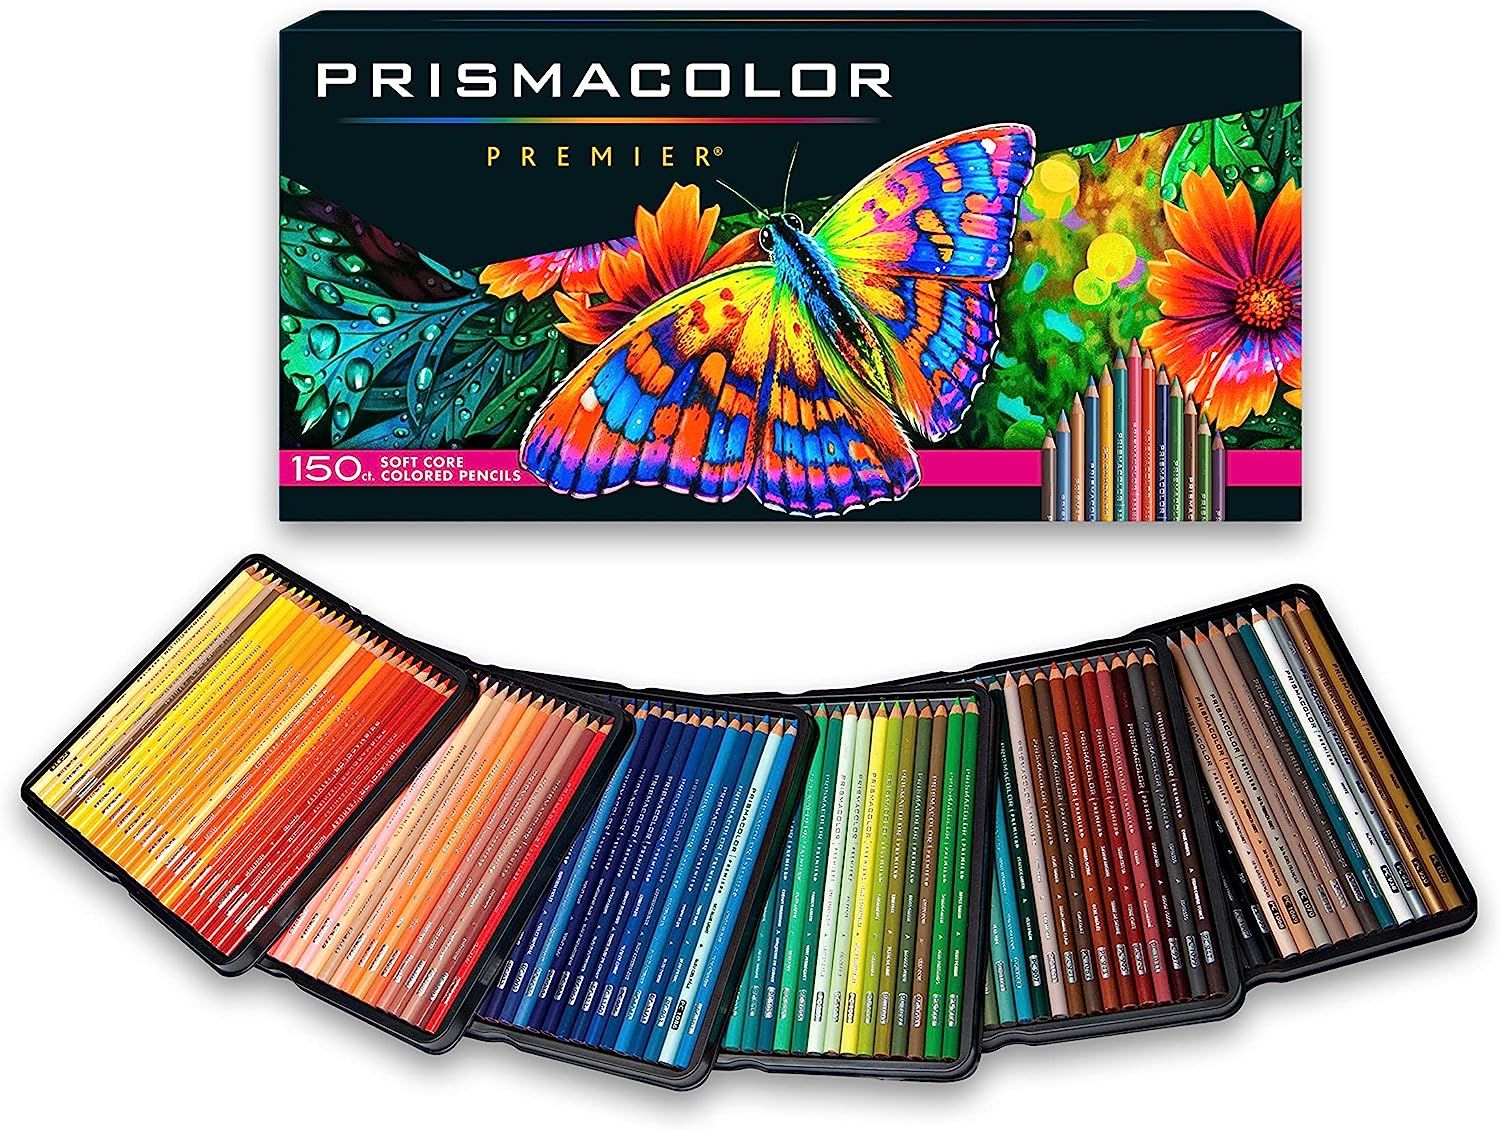 Prismacolor Premier Colored Pencils | Art Supplies for Drawing, Sketching, Adult Coloring | Soft ... | Amazon (US)